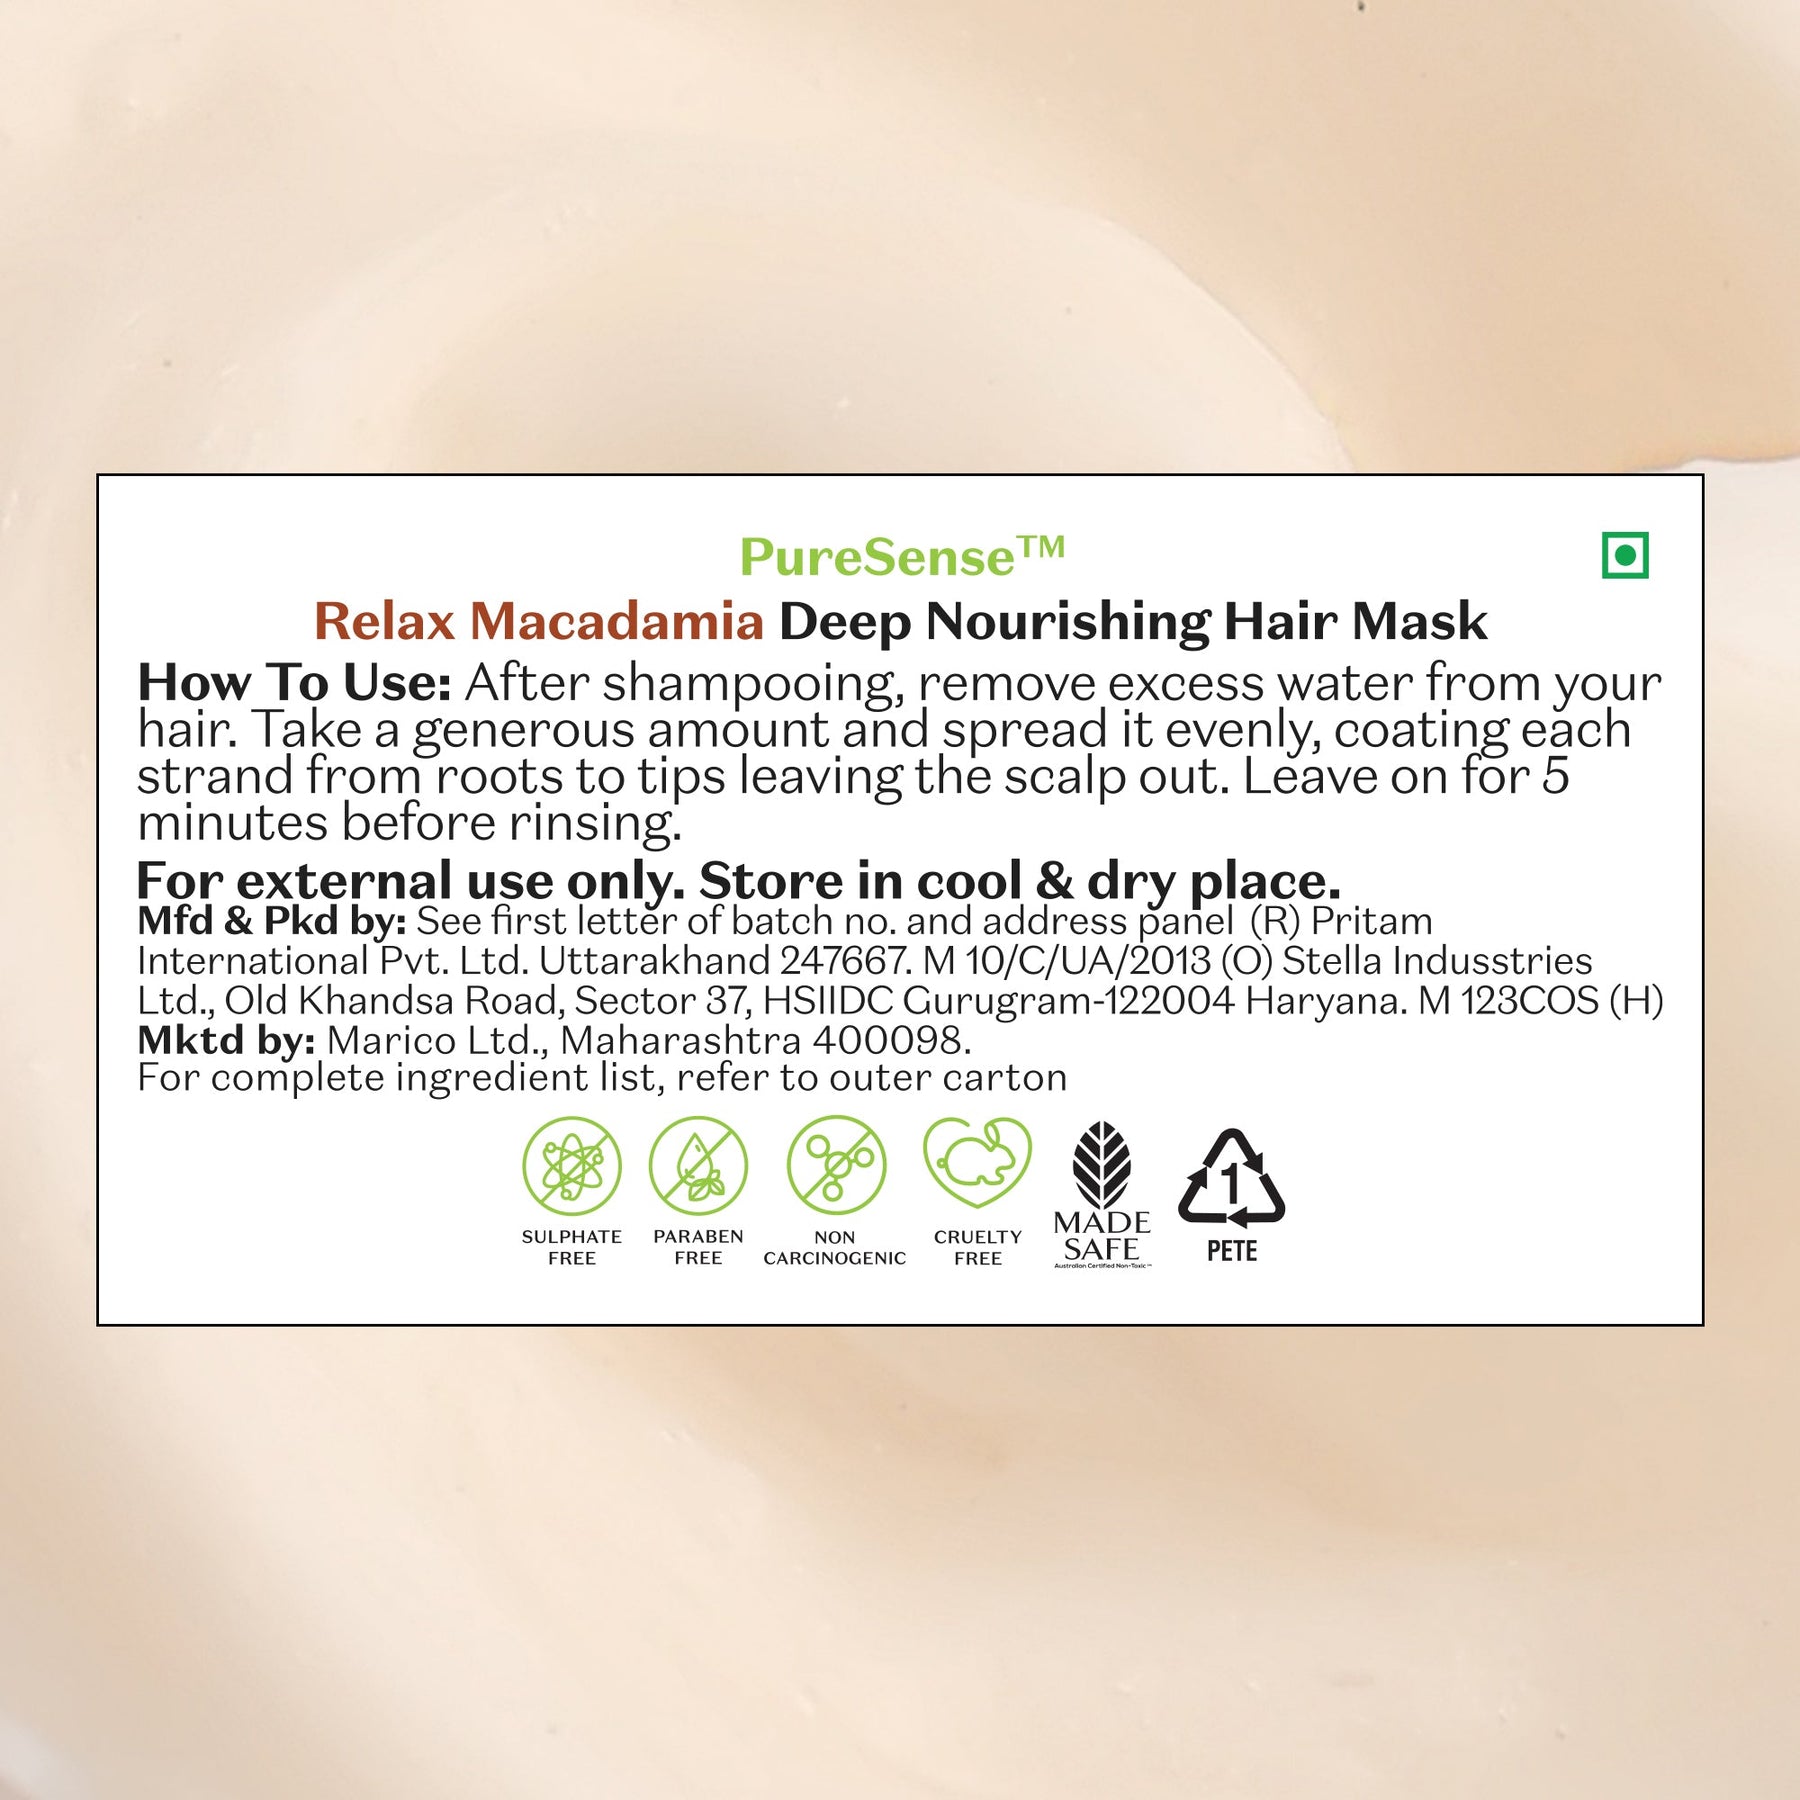 Macadamia Deep Nourishing Hair Mask | From the makers of Parachute Advansed | 140ml